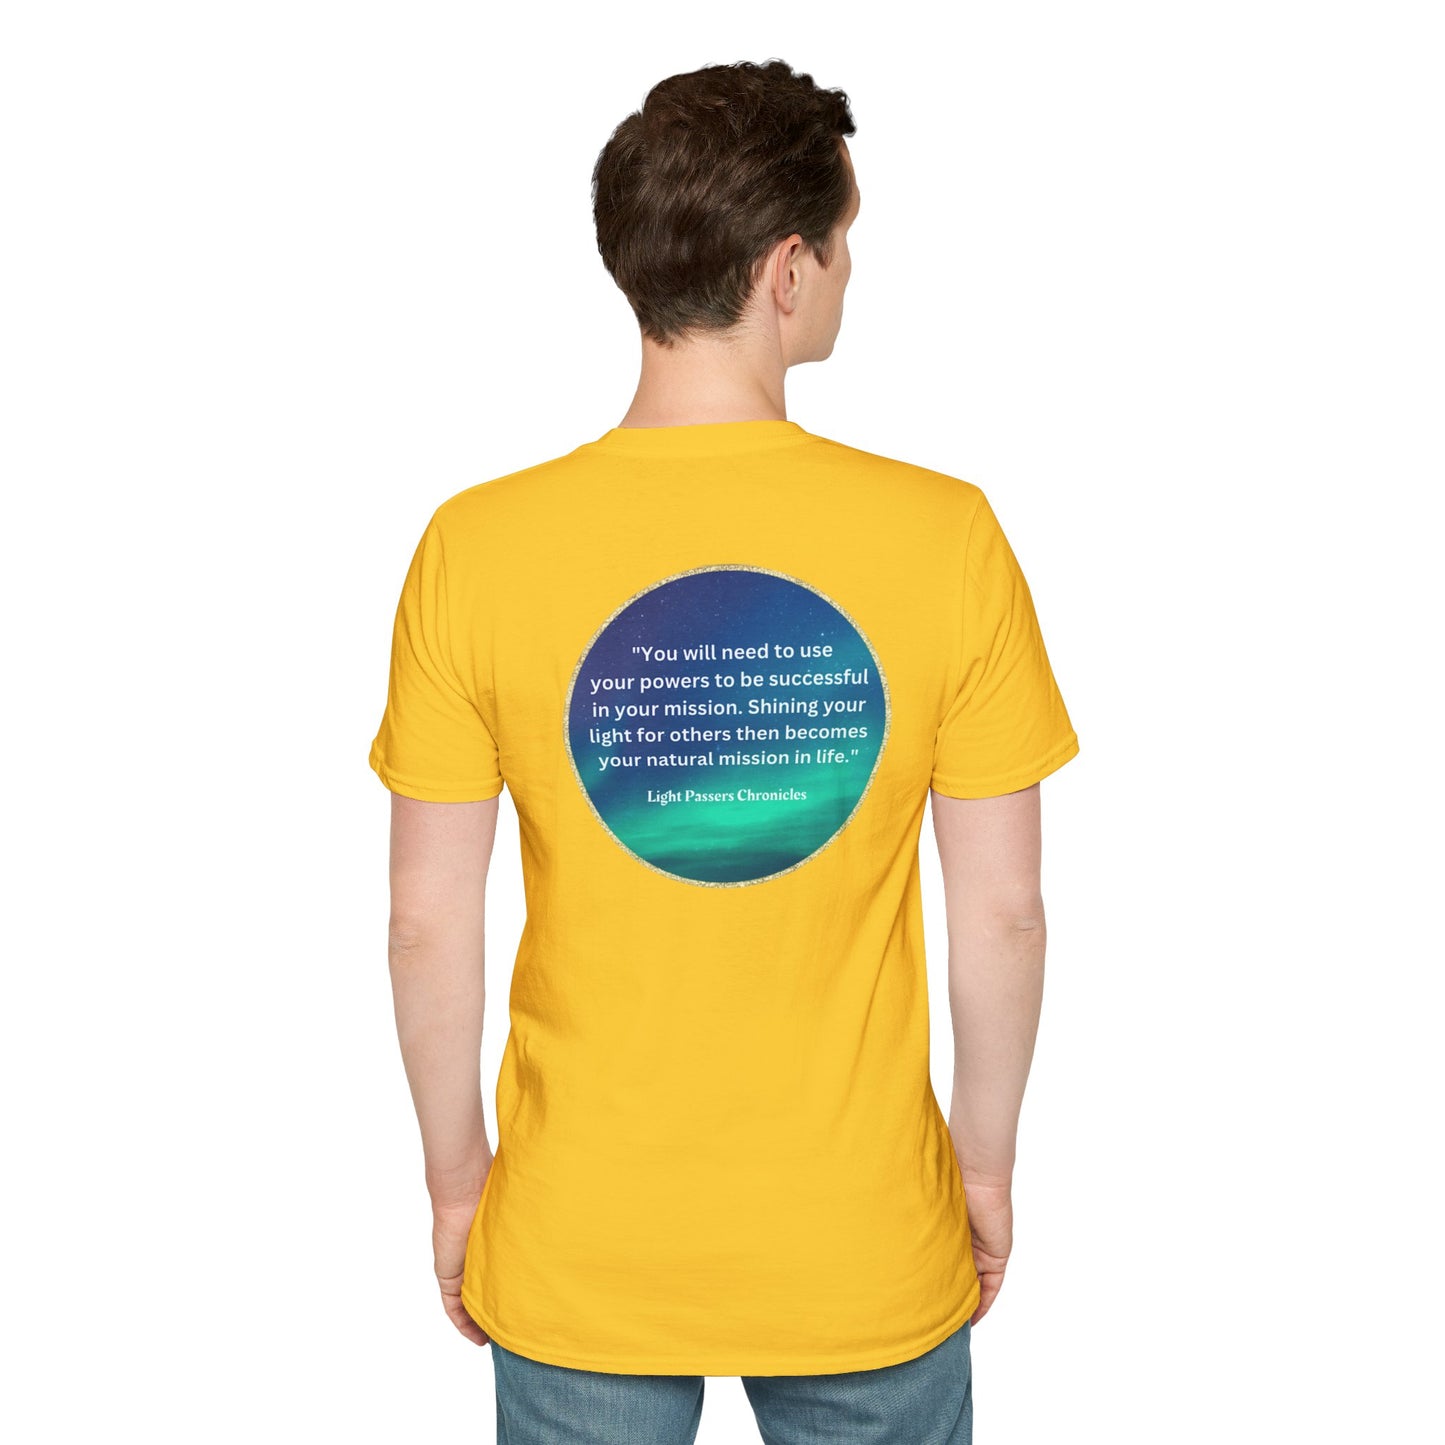 Light Passers Marketplace Use Your Powers to Inspire Change Unisex Soft T-shirt  Inspirational Messages, Mental Health